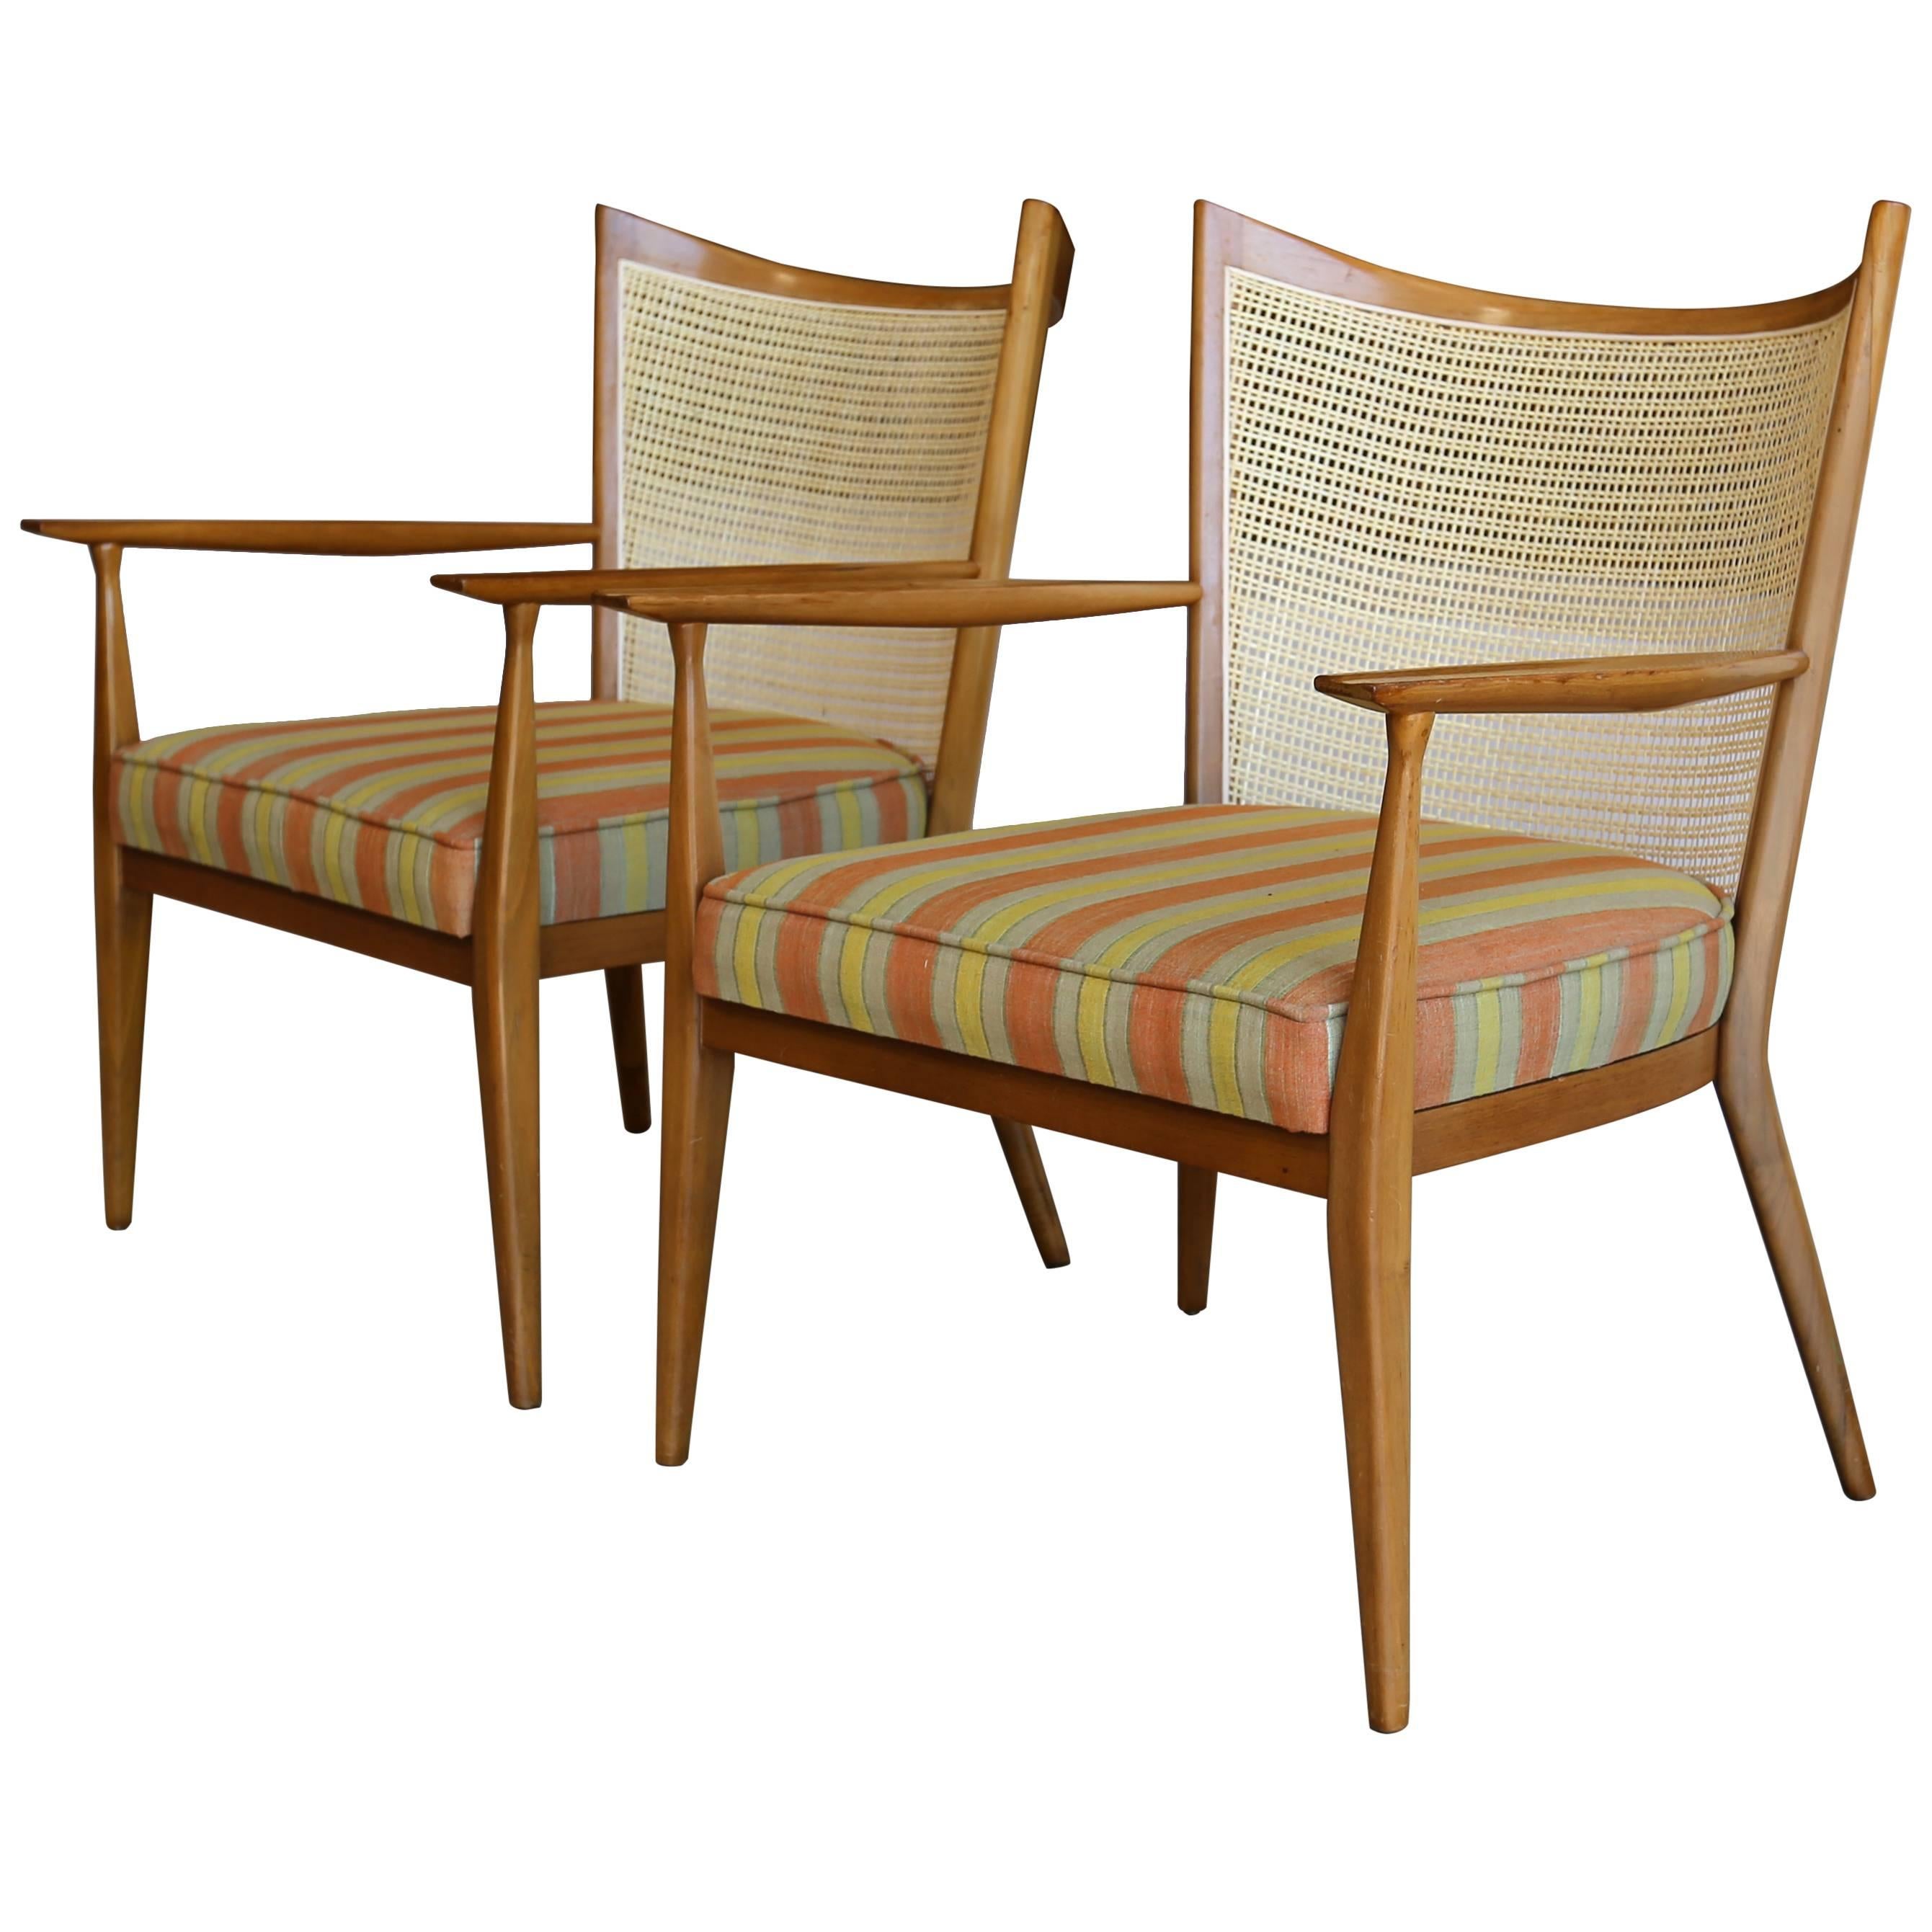 Pair of Lounge Chairs by Paul McCobb